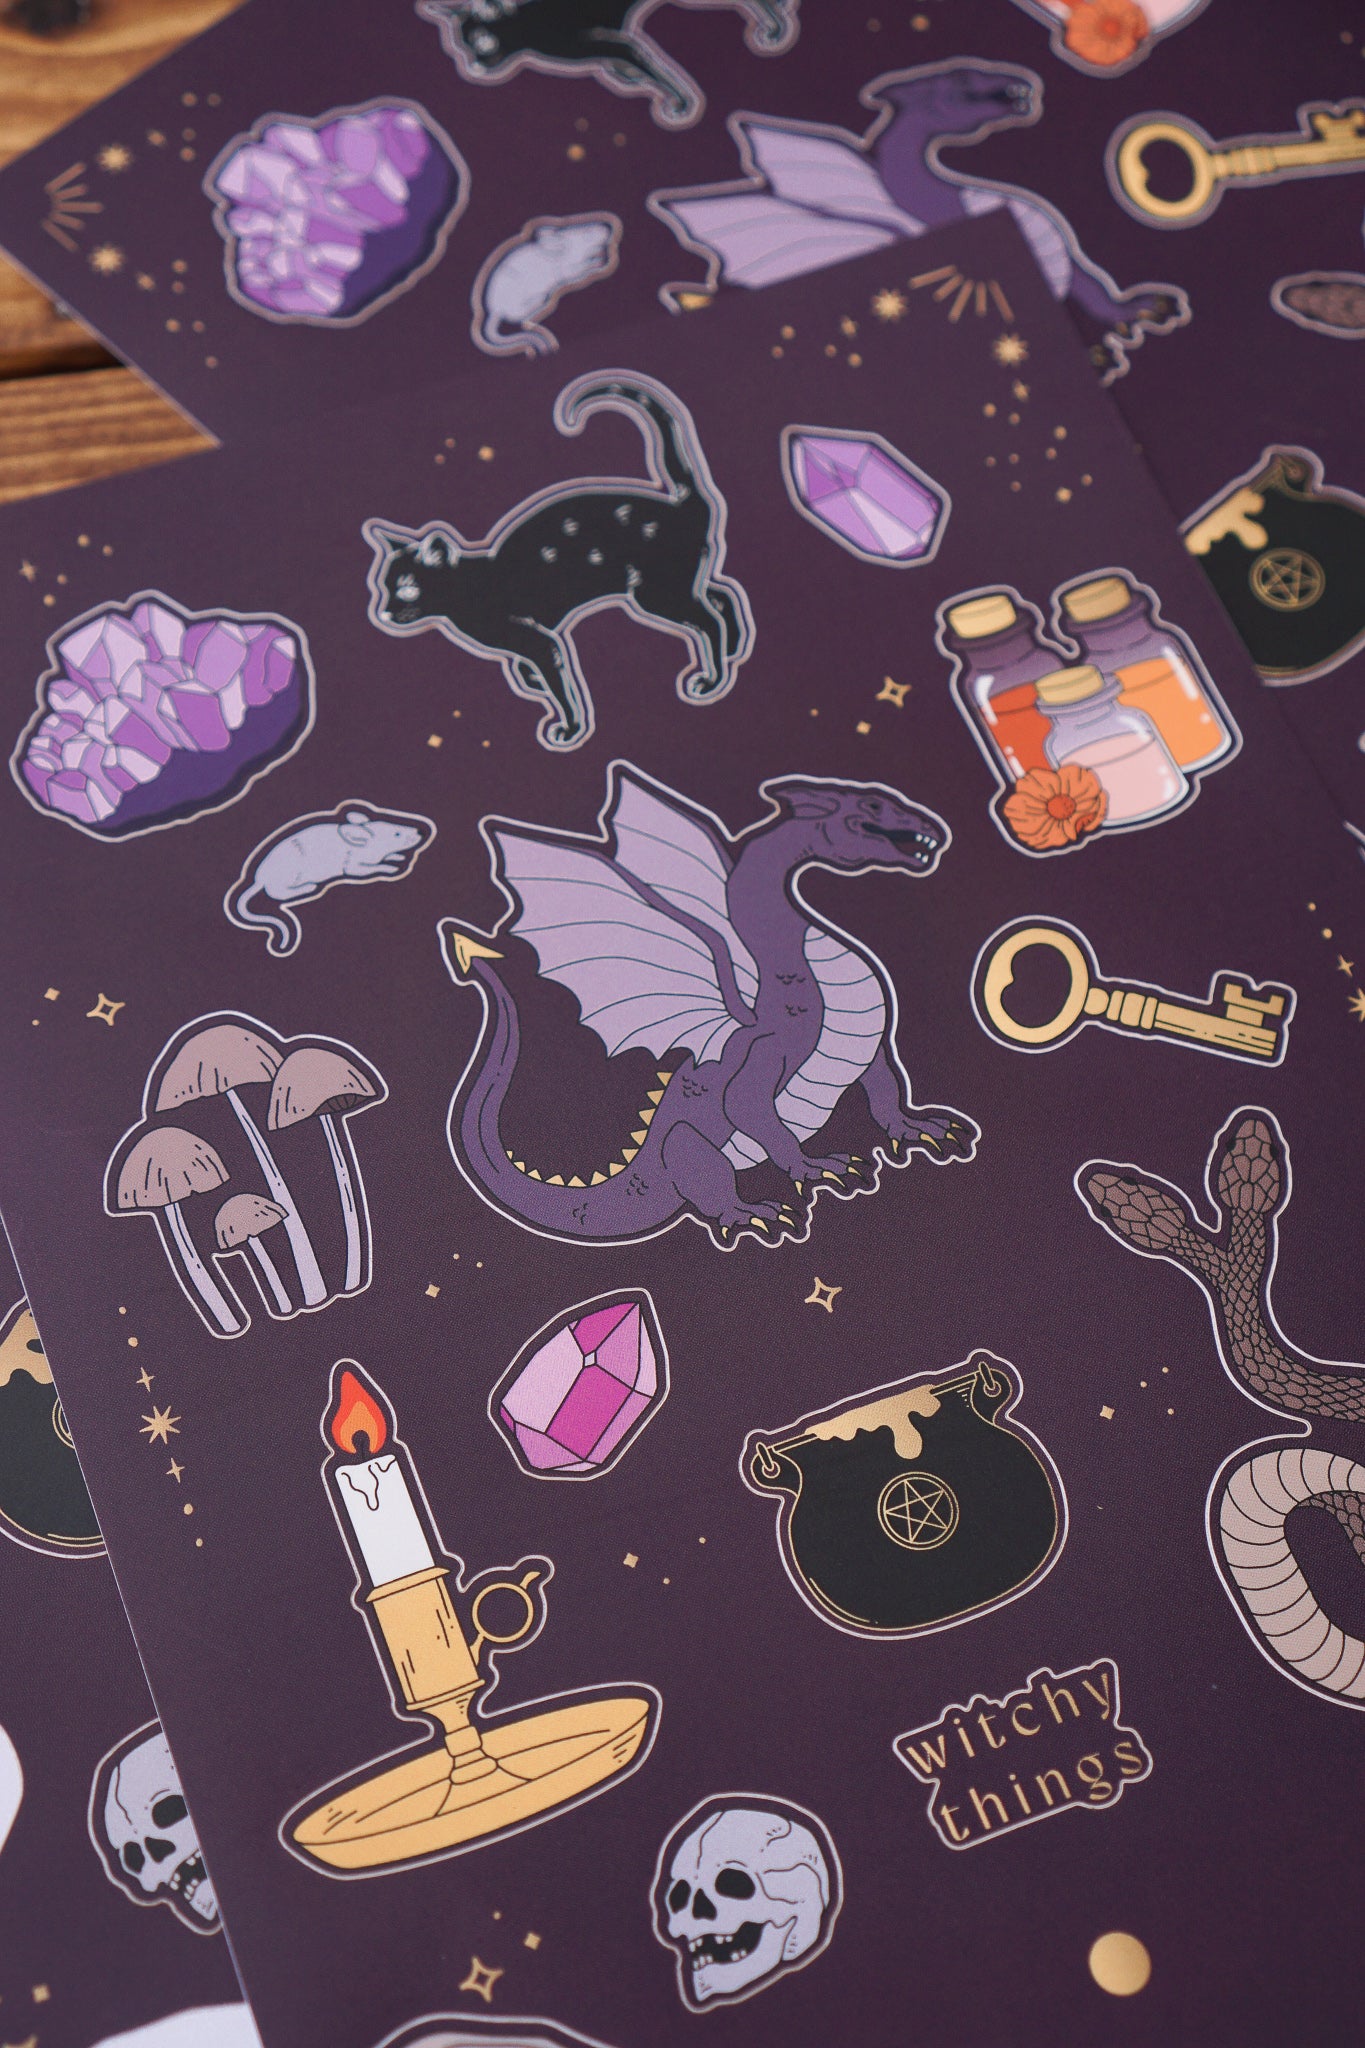 Witchy Things Sticker Sheet